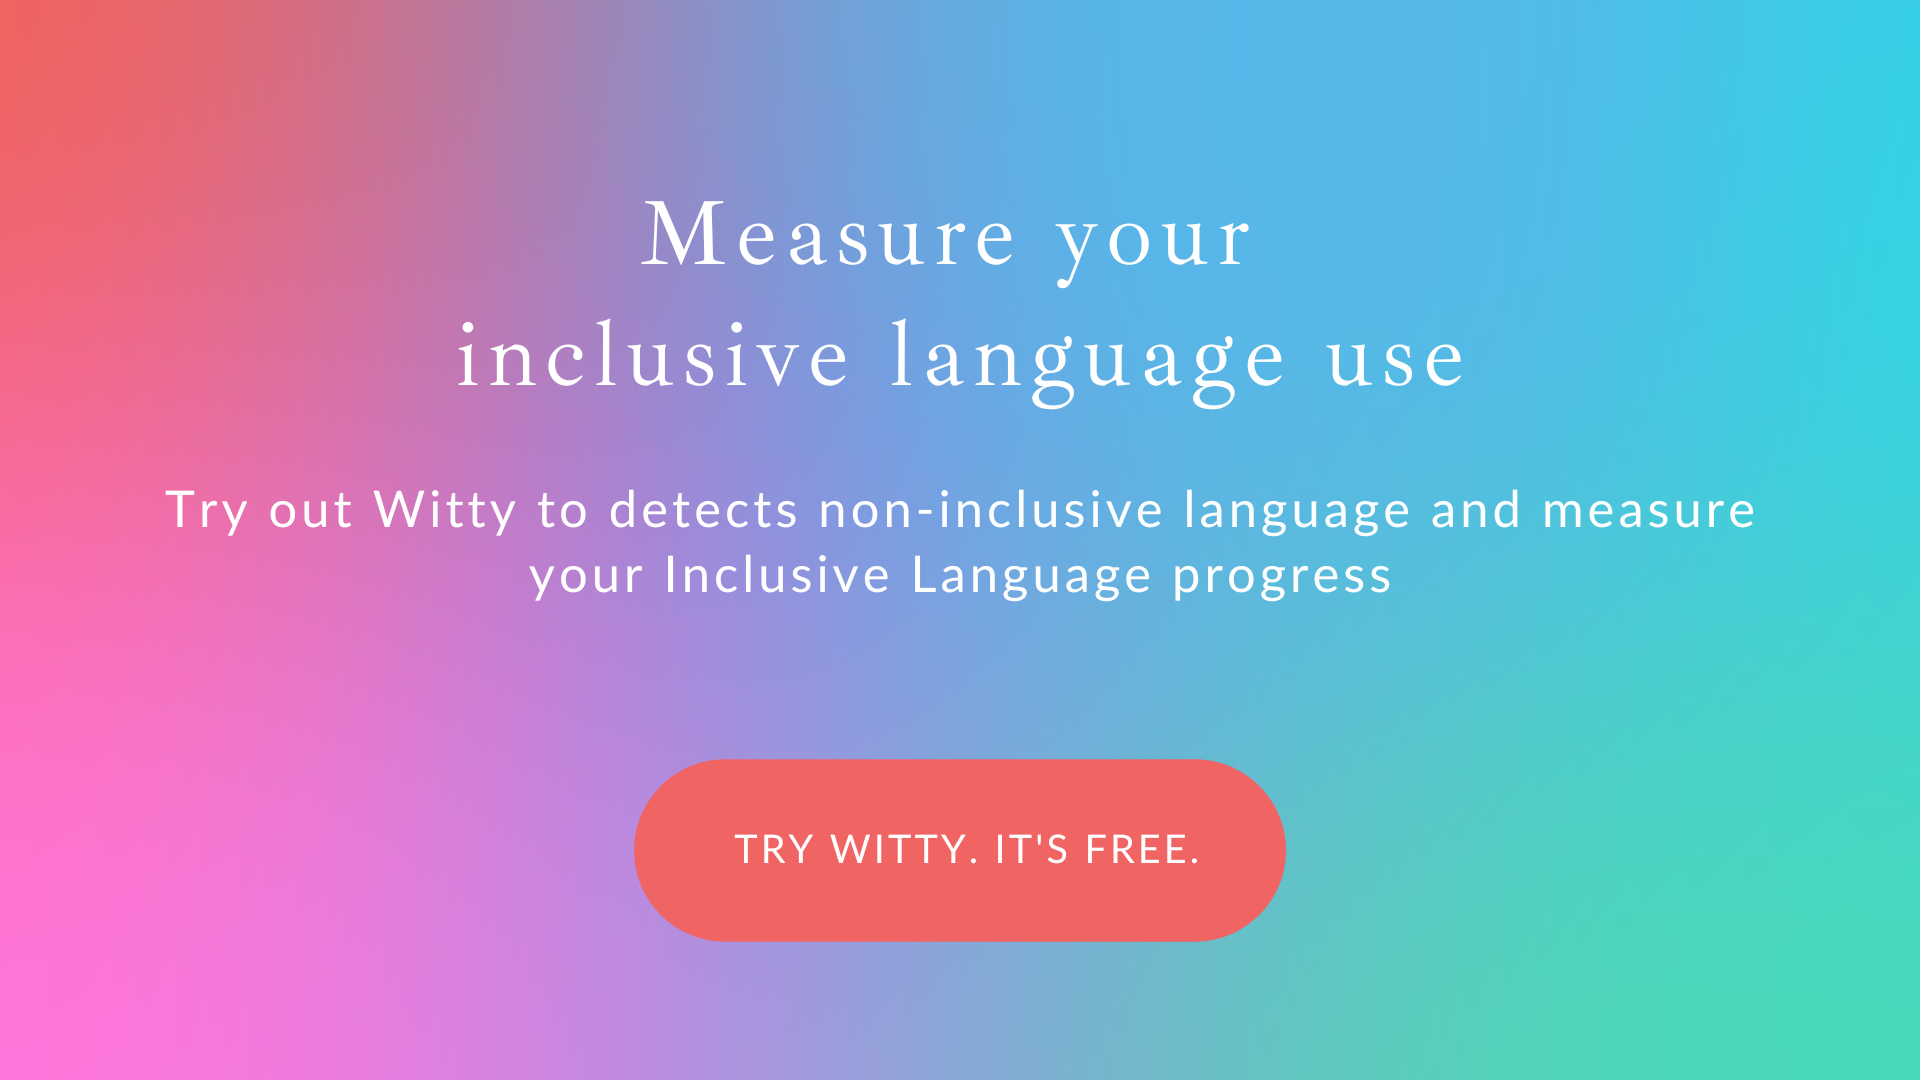 Measure your inclusive language use. Try out Witty to detect non-inclusive language & measure your Inclusive Language progress. Button saying "Try Witty. It's free".